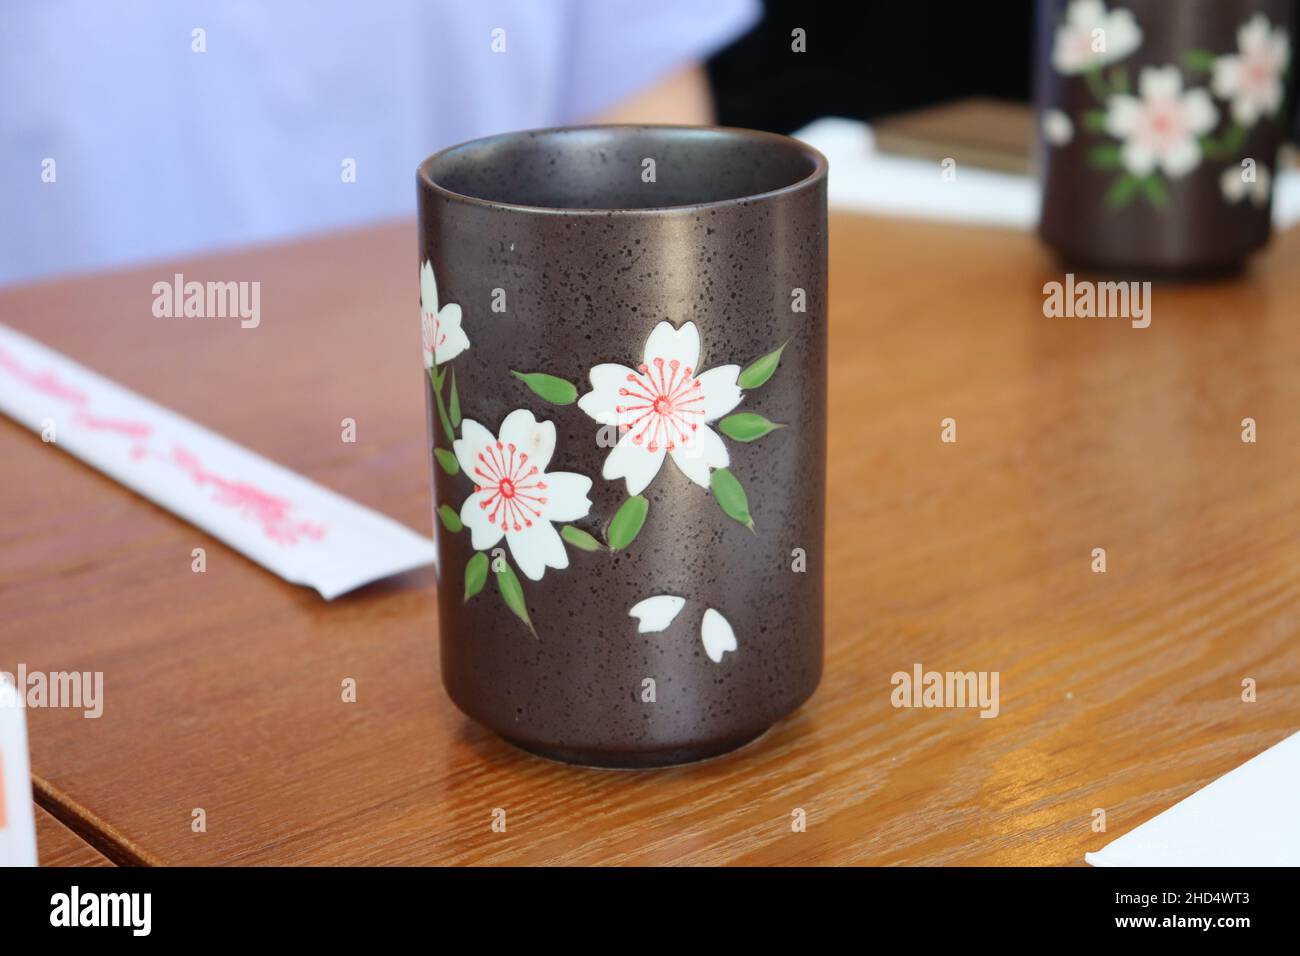 A simple stone cup with a cherry blossom design on it Stock Photo